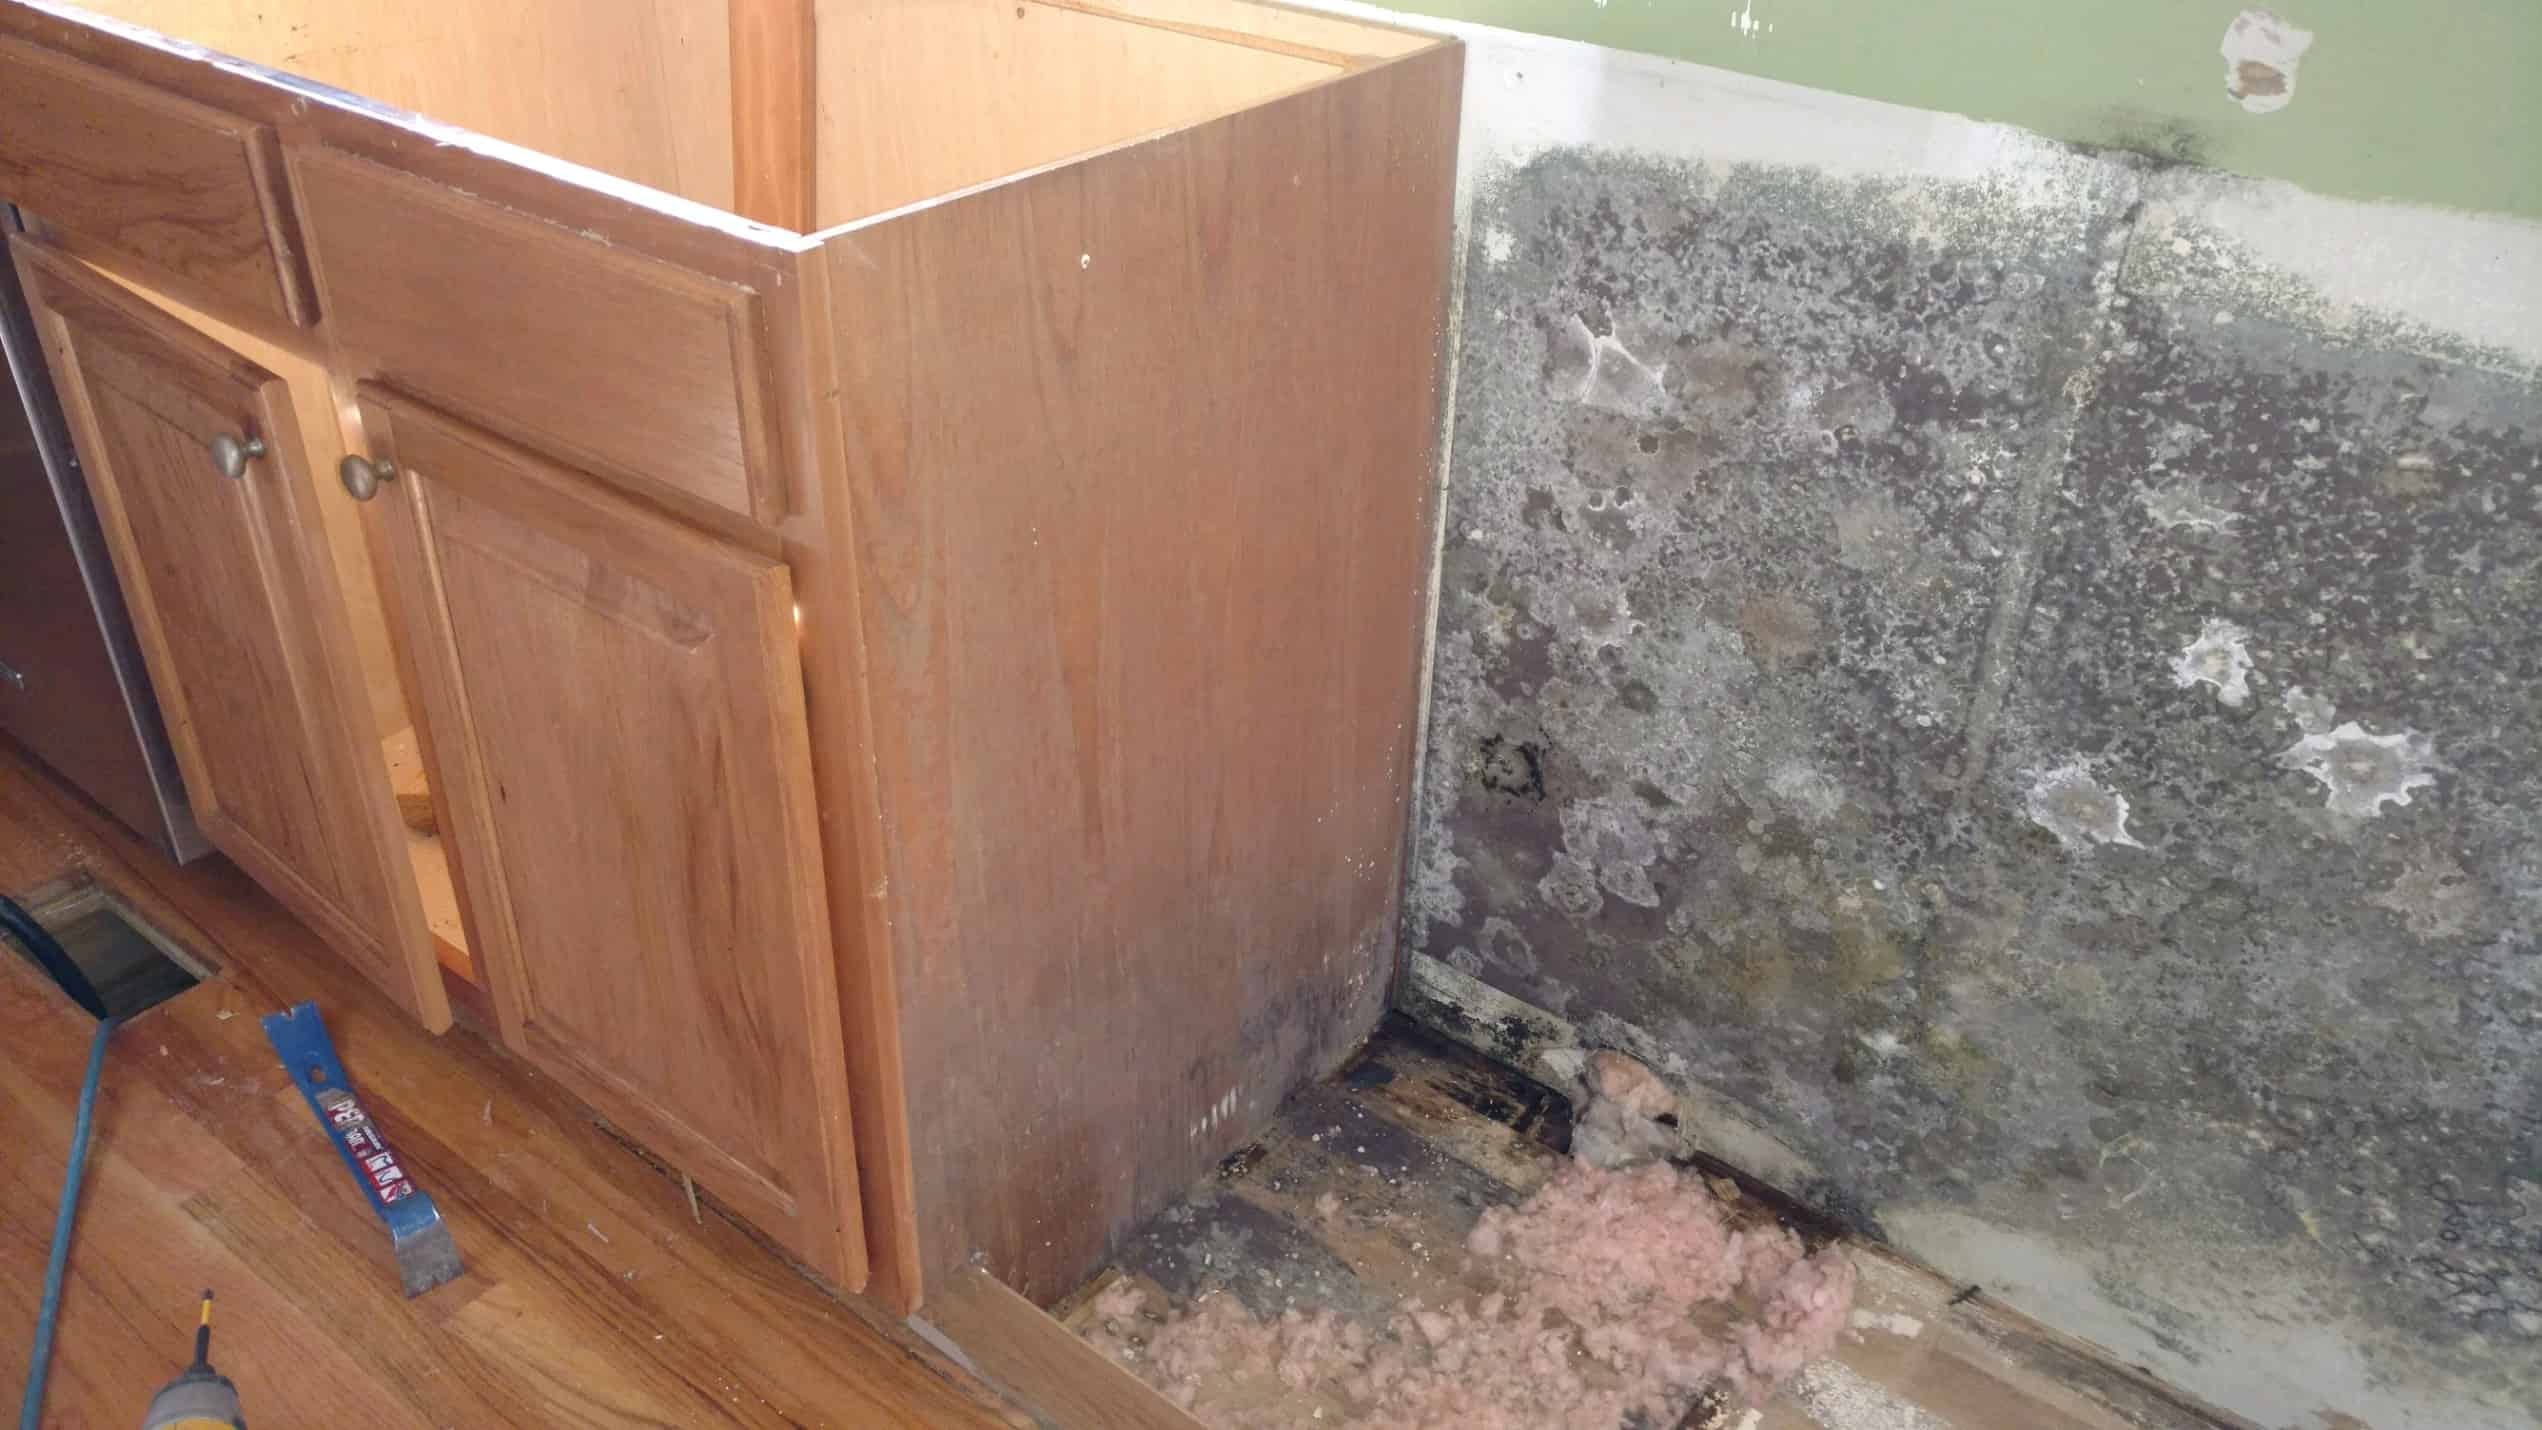 How to Repair Kitchen Cabinets with Water Damage? [Steps Explained]